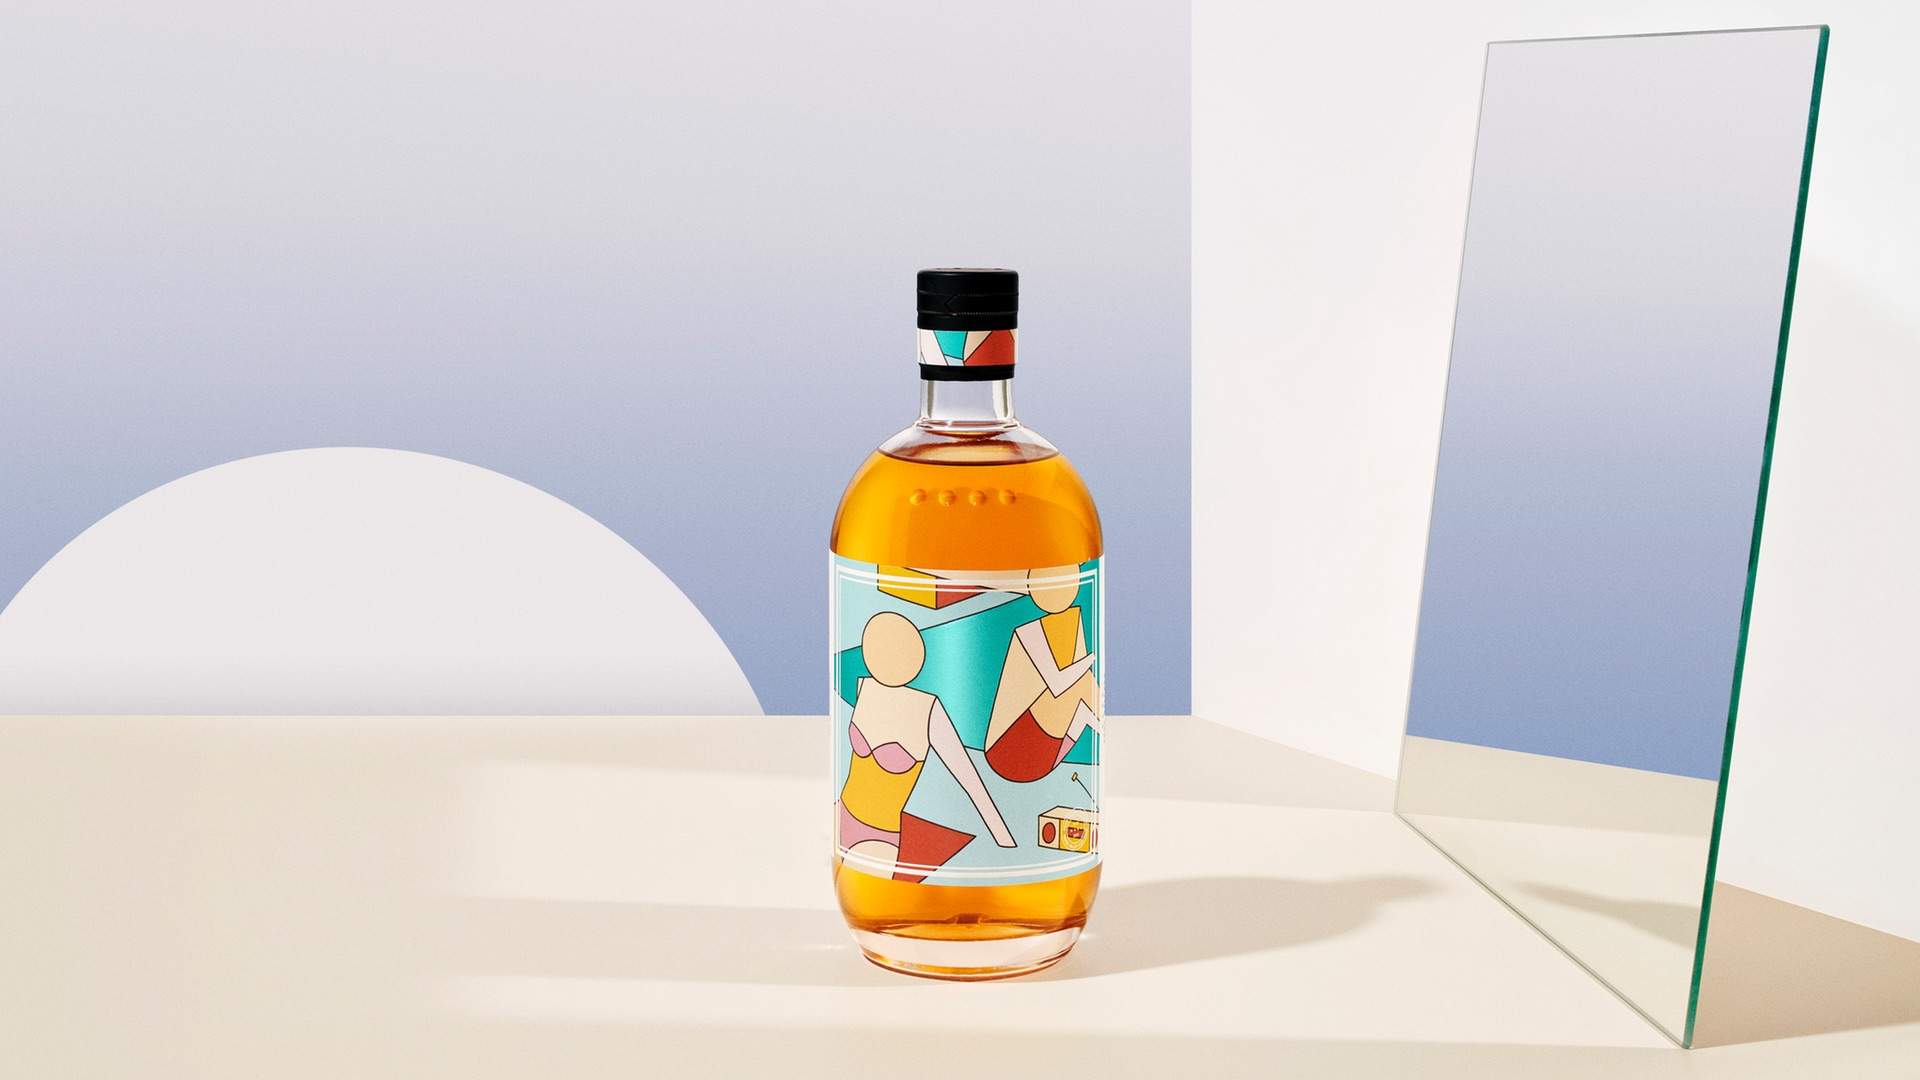 Four Pillars Is About to Release Its 2018 Christmas Gin So You Can Get Drunk on Pudding with Nan